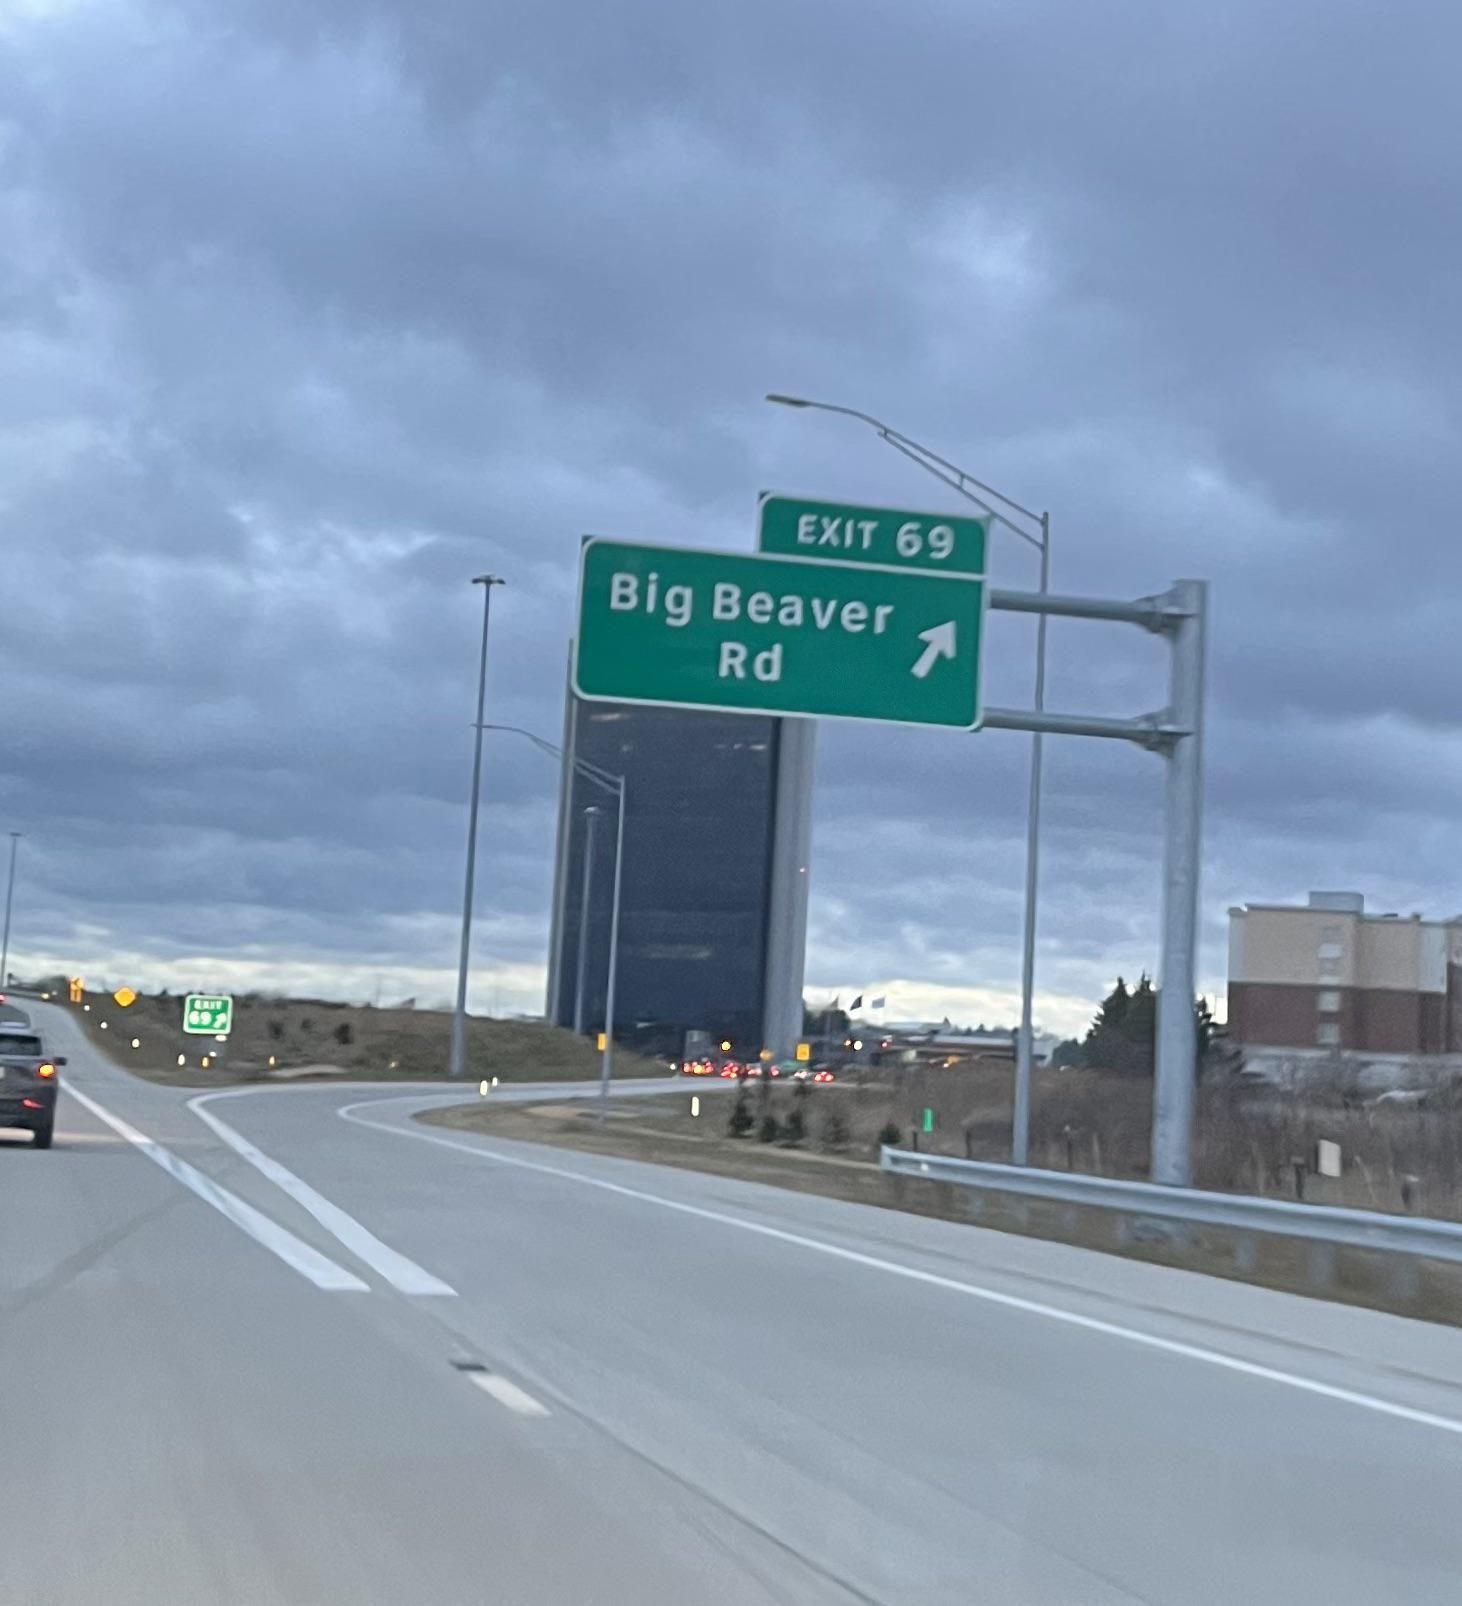 On I75 here in Michigan, exit 69 happens to be for Big Beaver Road